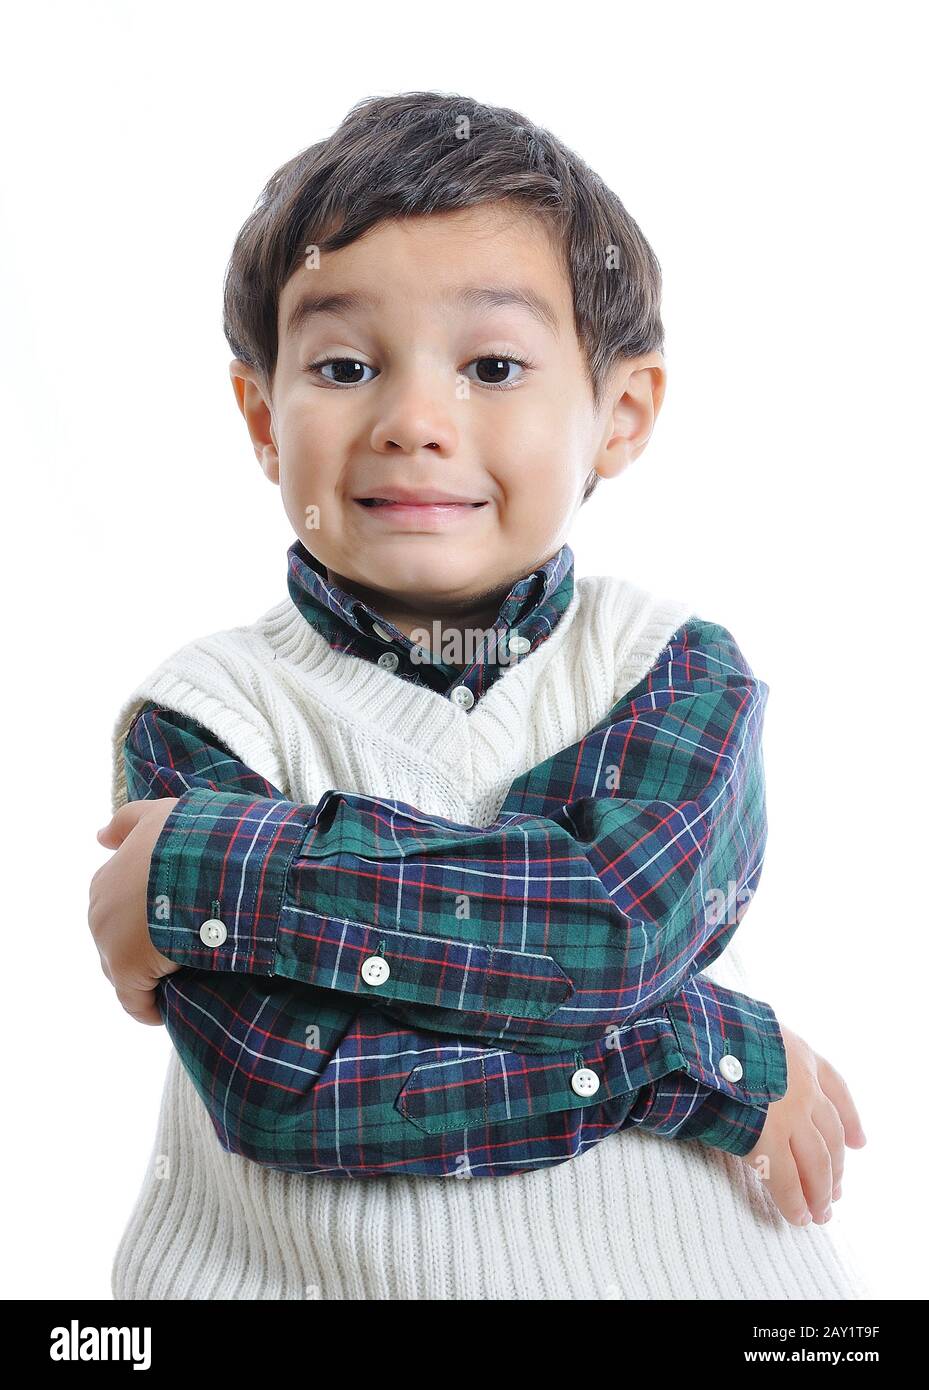 Little positive kid with nice clothes Stock Photo - Alamy